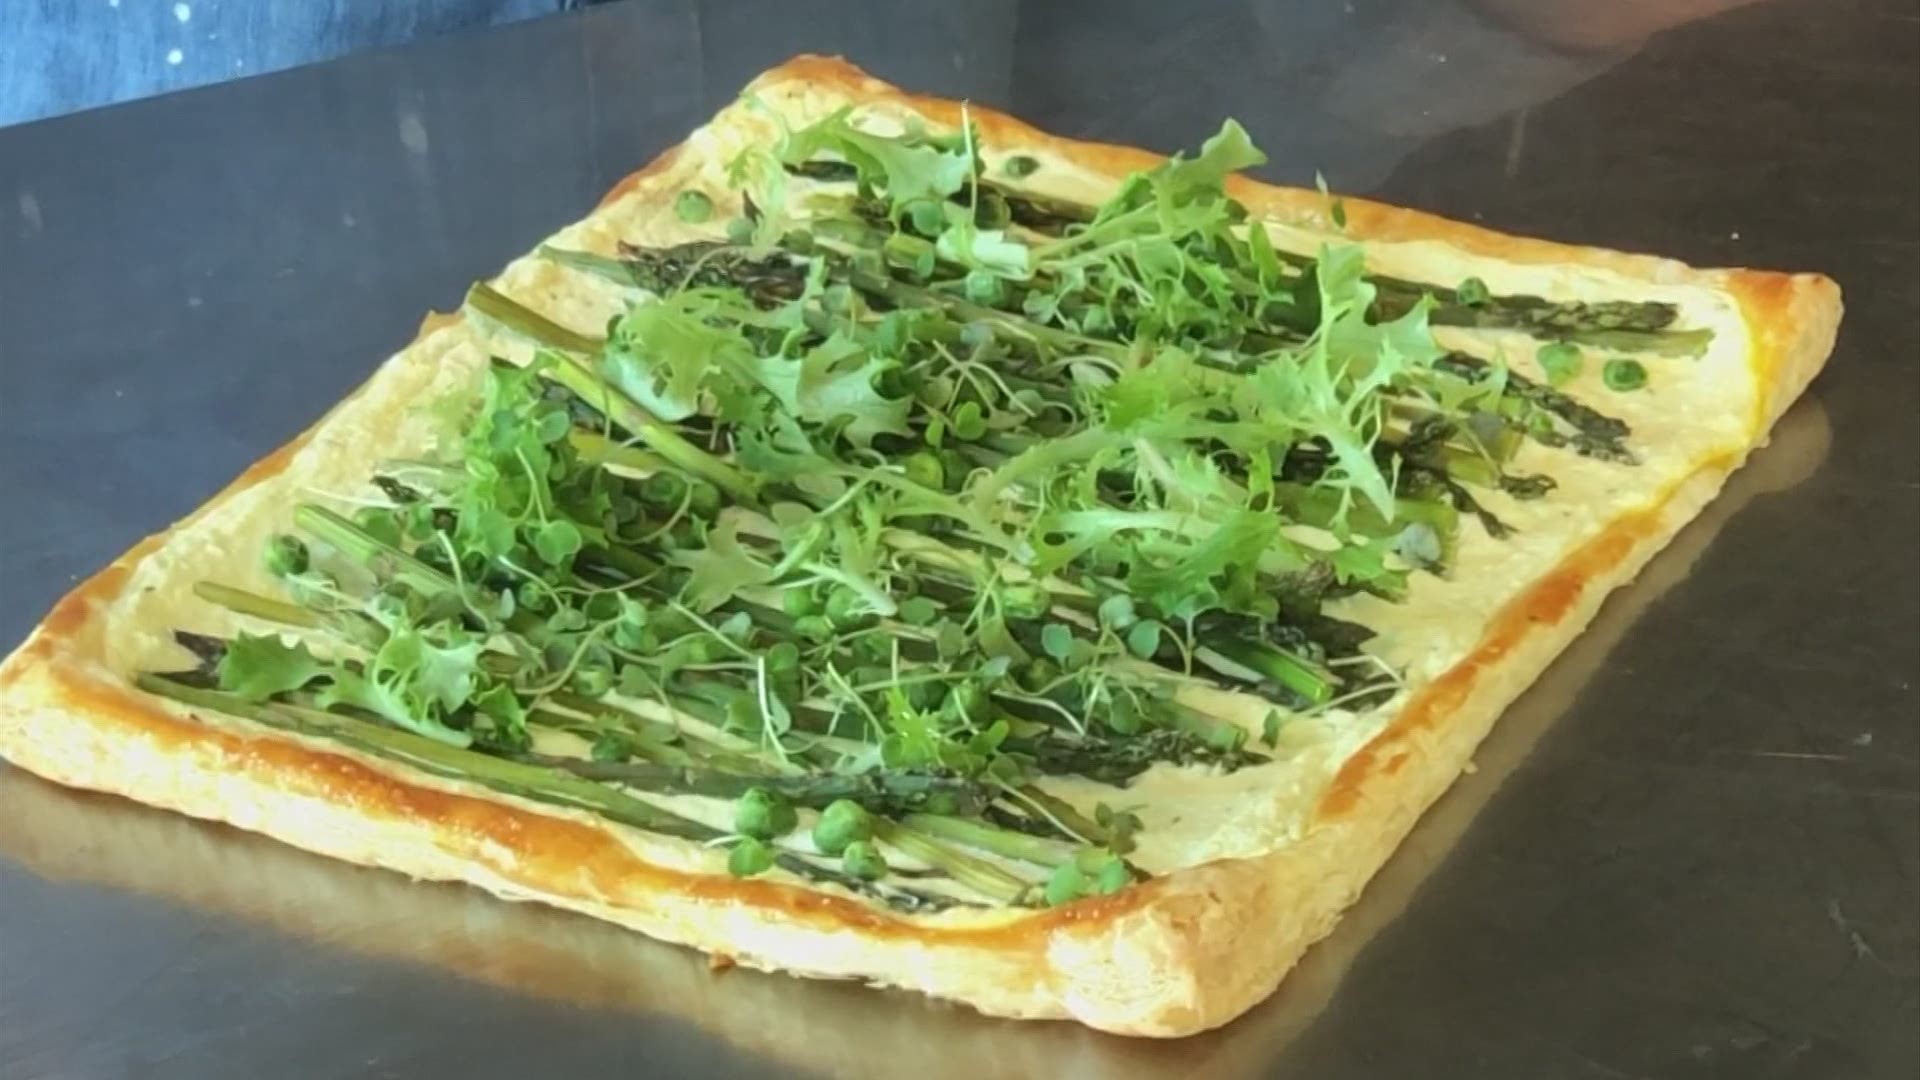 Tis the season for beautiful spring vegetables. Why not make a spring vegetable tart for Mother's Day?